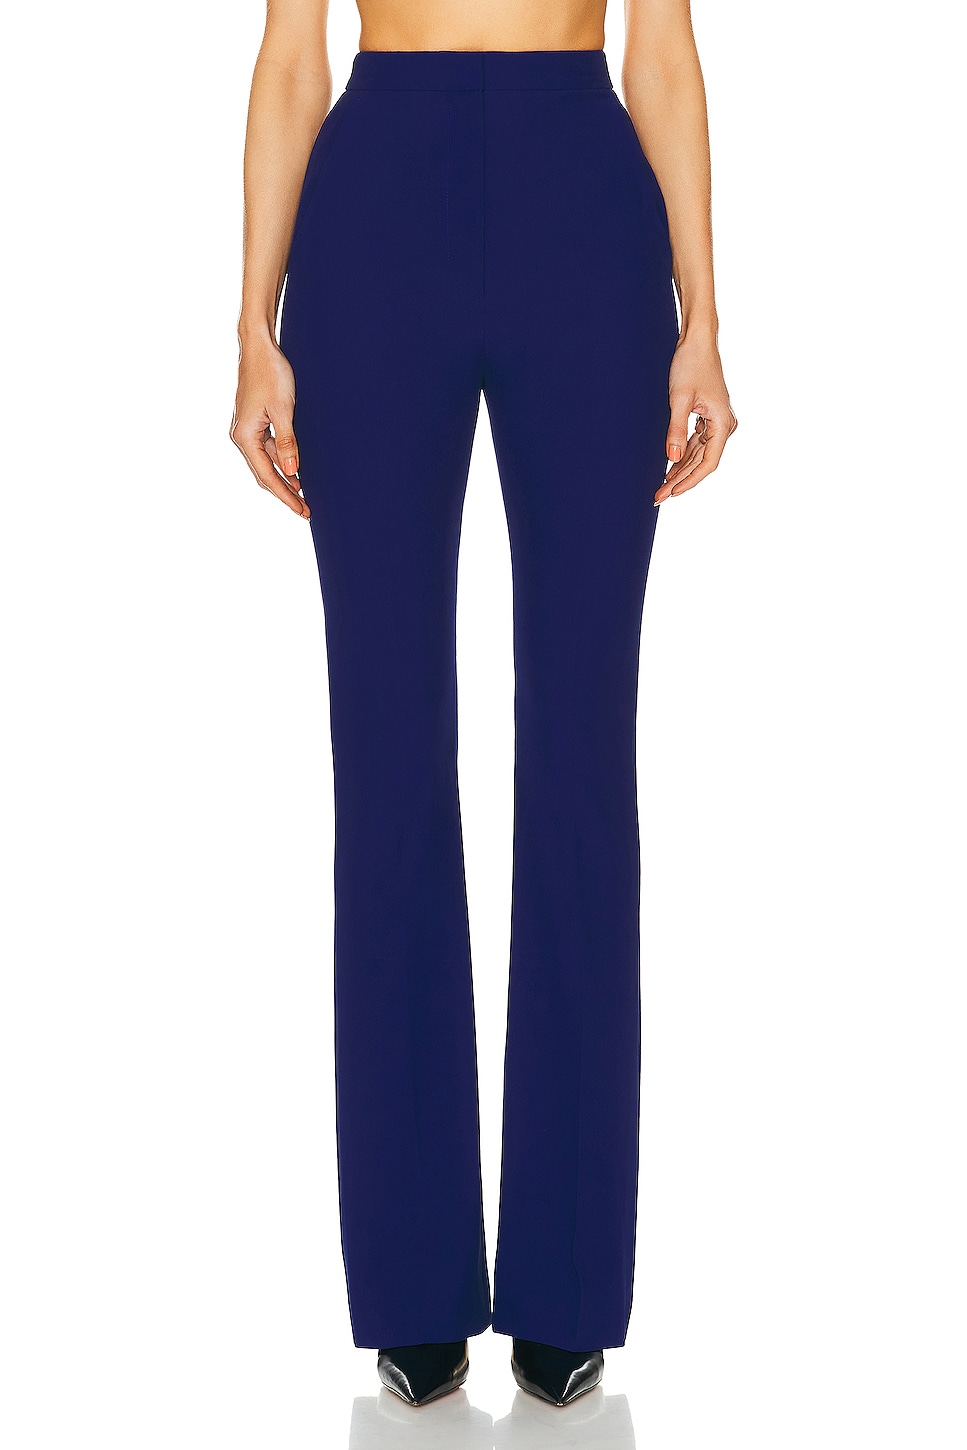 Image 1 of Alexander McQueen Tailored Trouser in Electric Blue